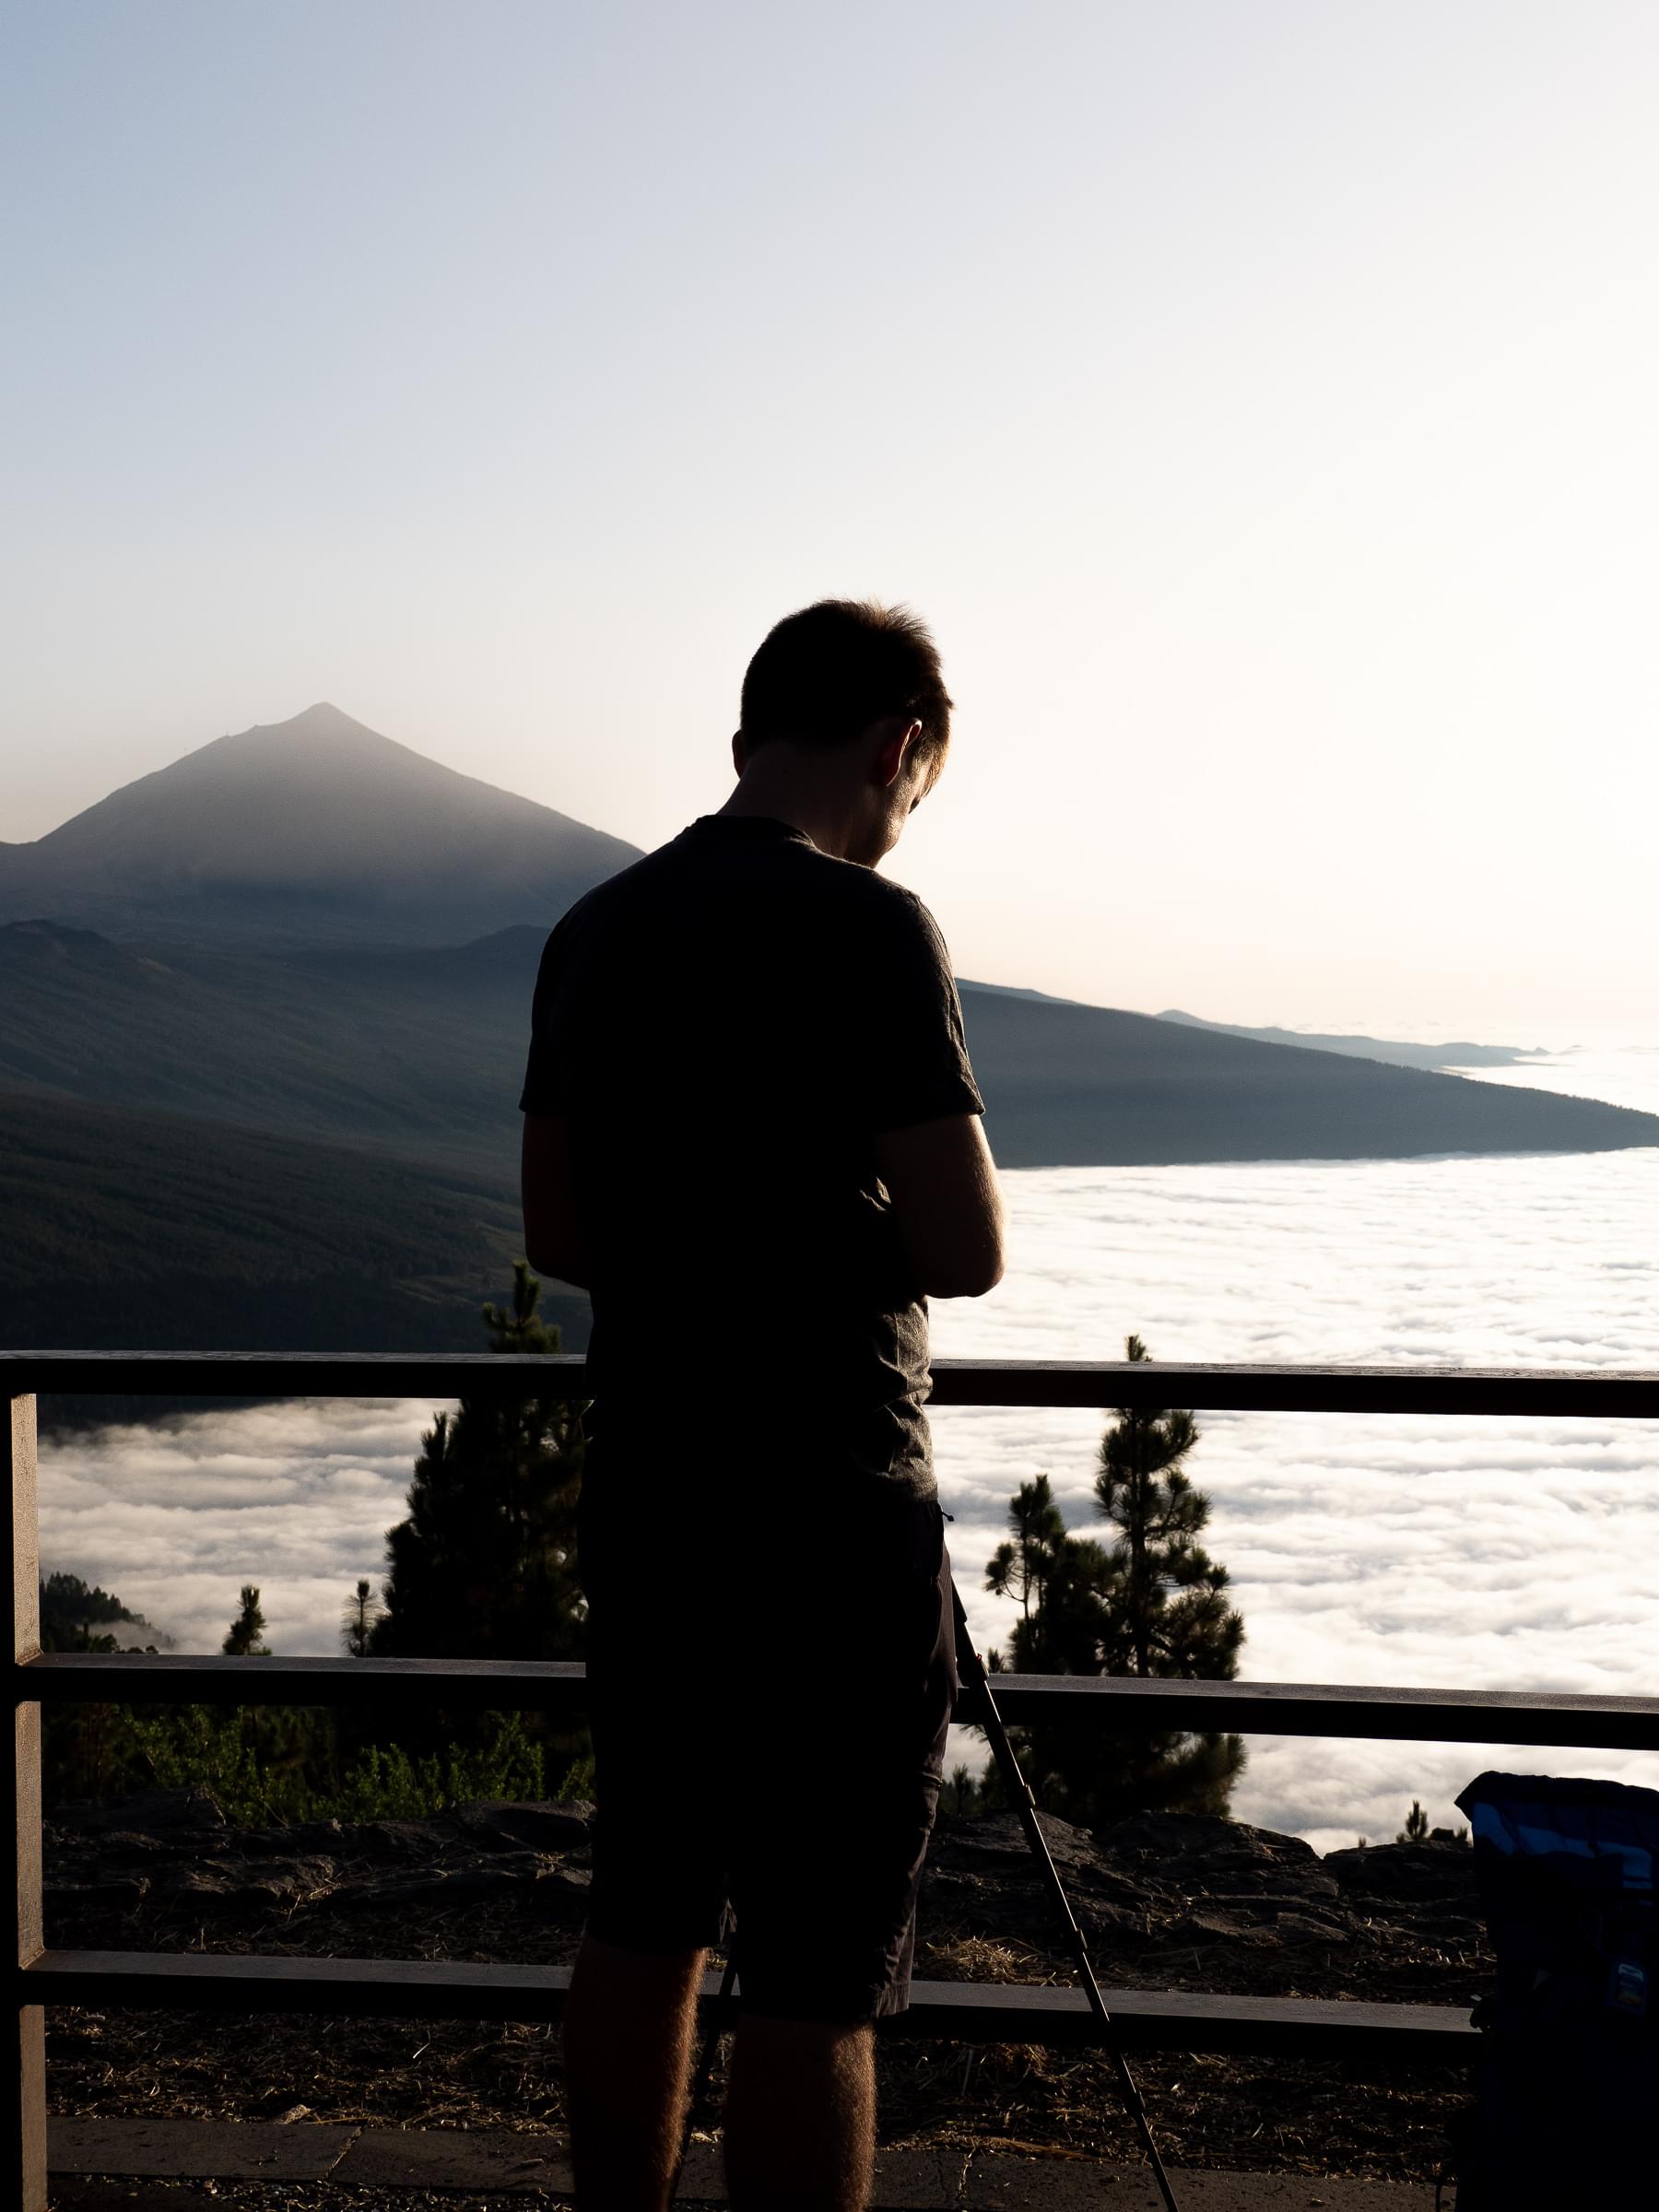 Me (Claas Lange) shot from behind as a silhouette overlooking a sunset on Tenerife with the Teide in the background